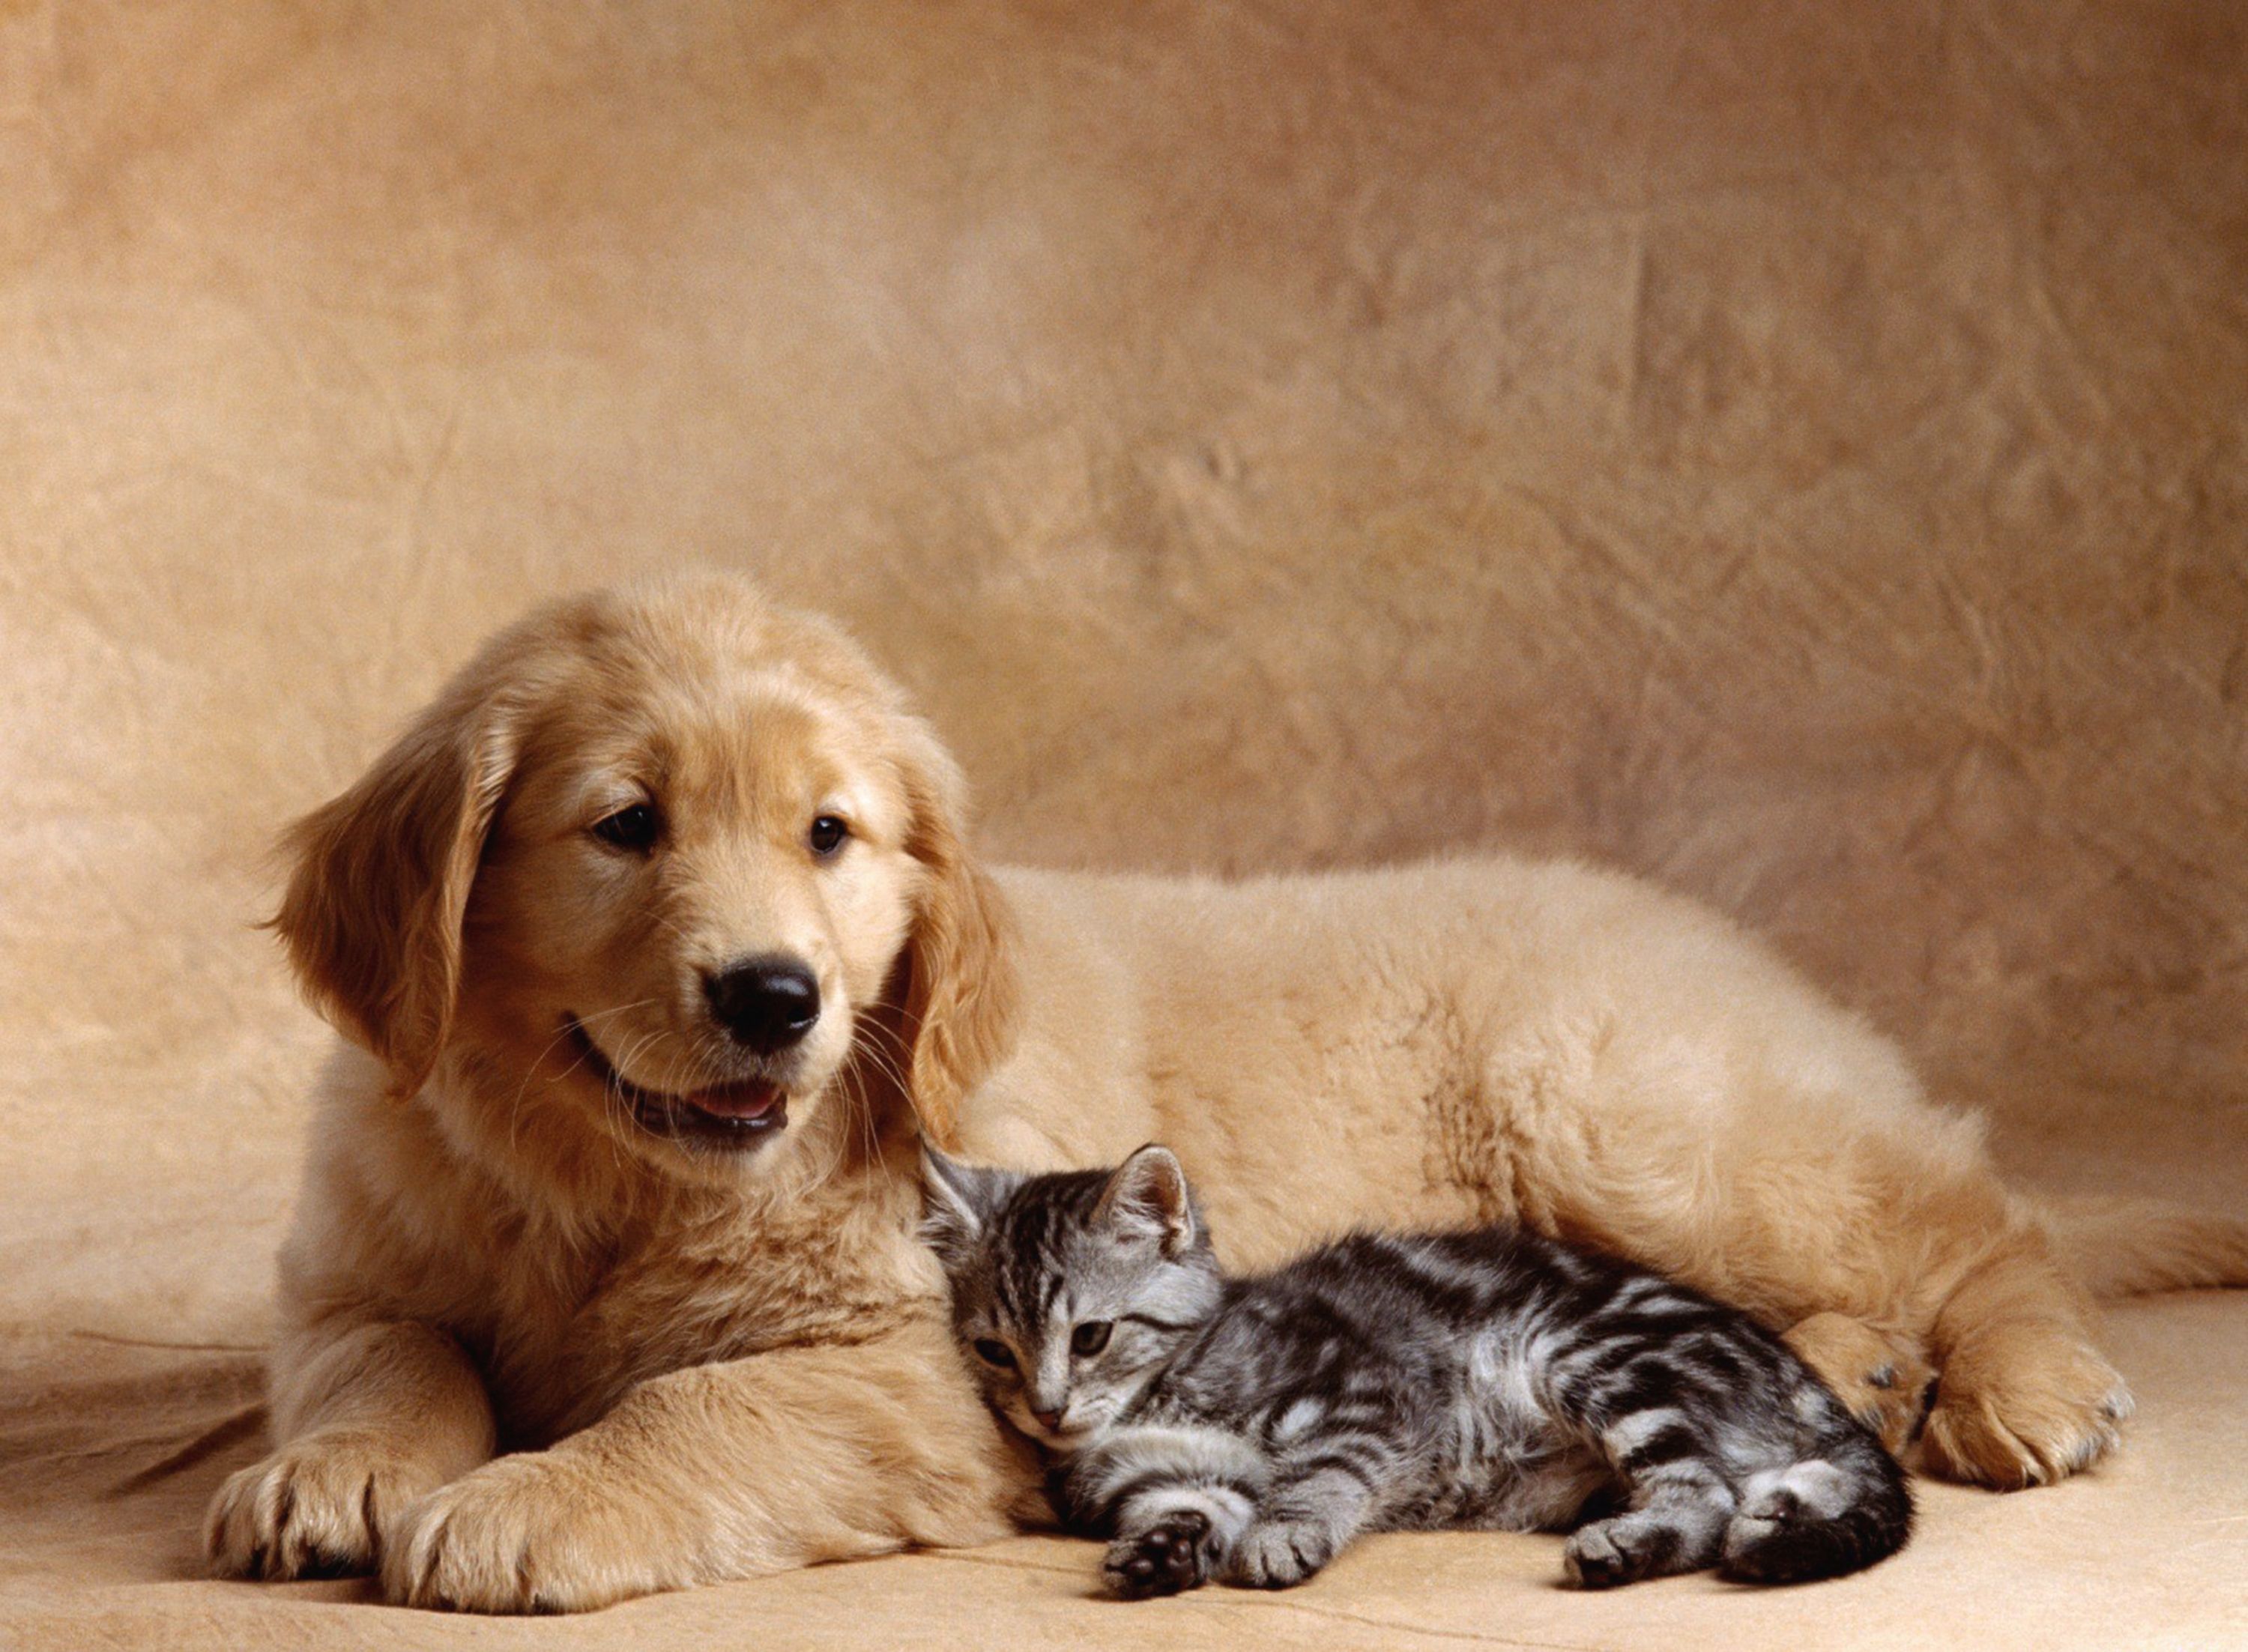 Summer Dog And Cat Wallpapers Wallpaper Cave